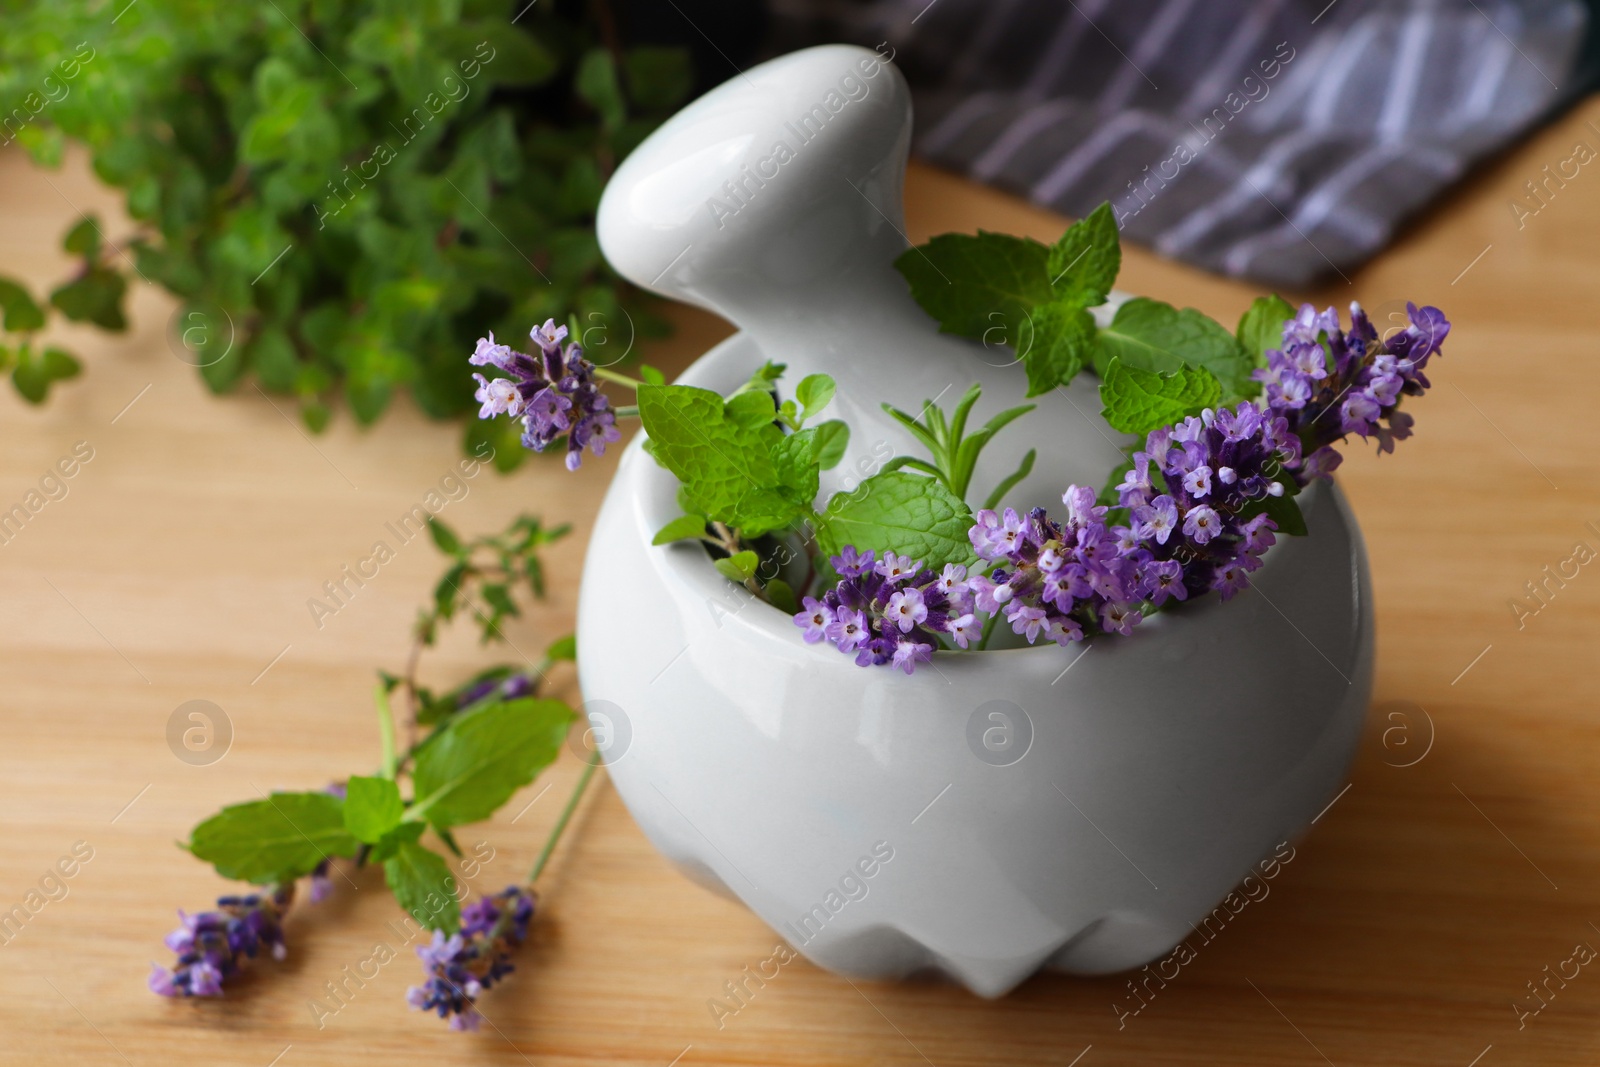 Photo of Mortar with fresh lavender flowers, herbs and pestle on wooden table